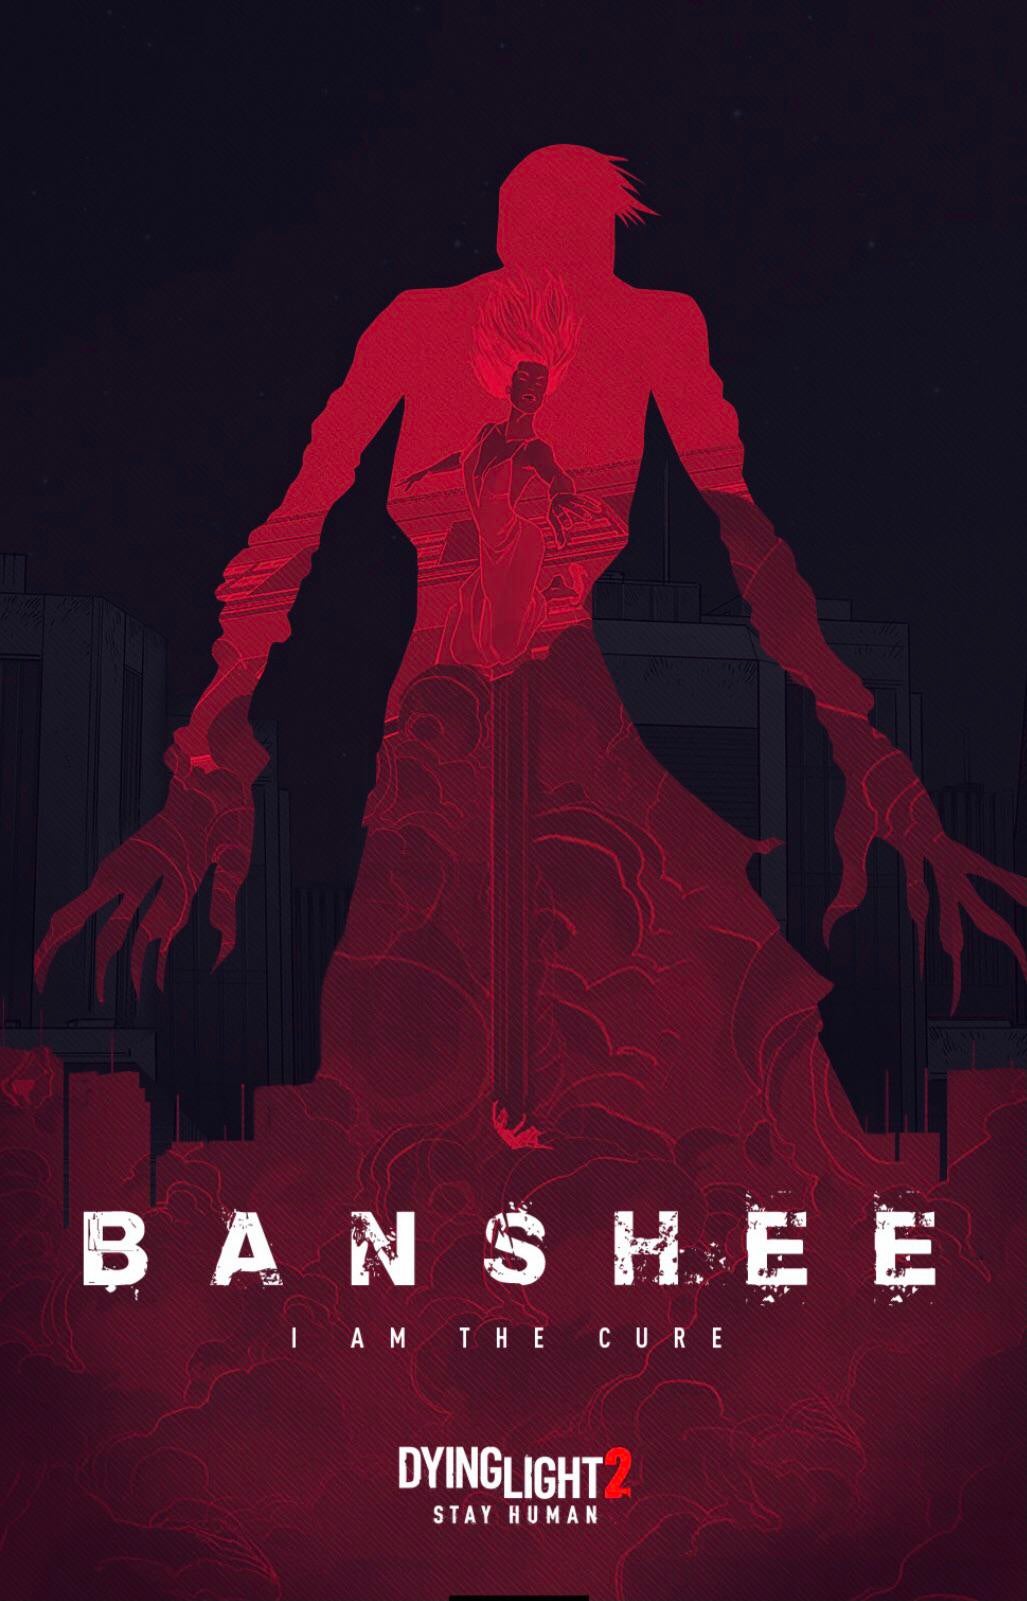 Dying Light 2 Stay Human – Banshee: I Am The Cure